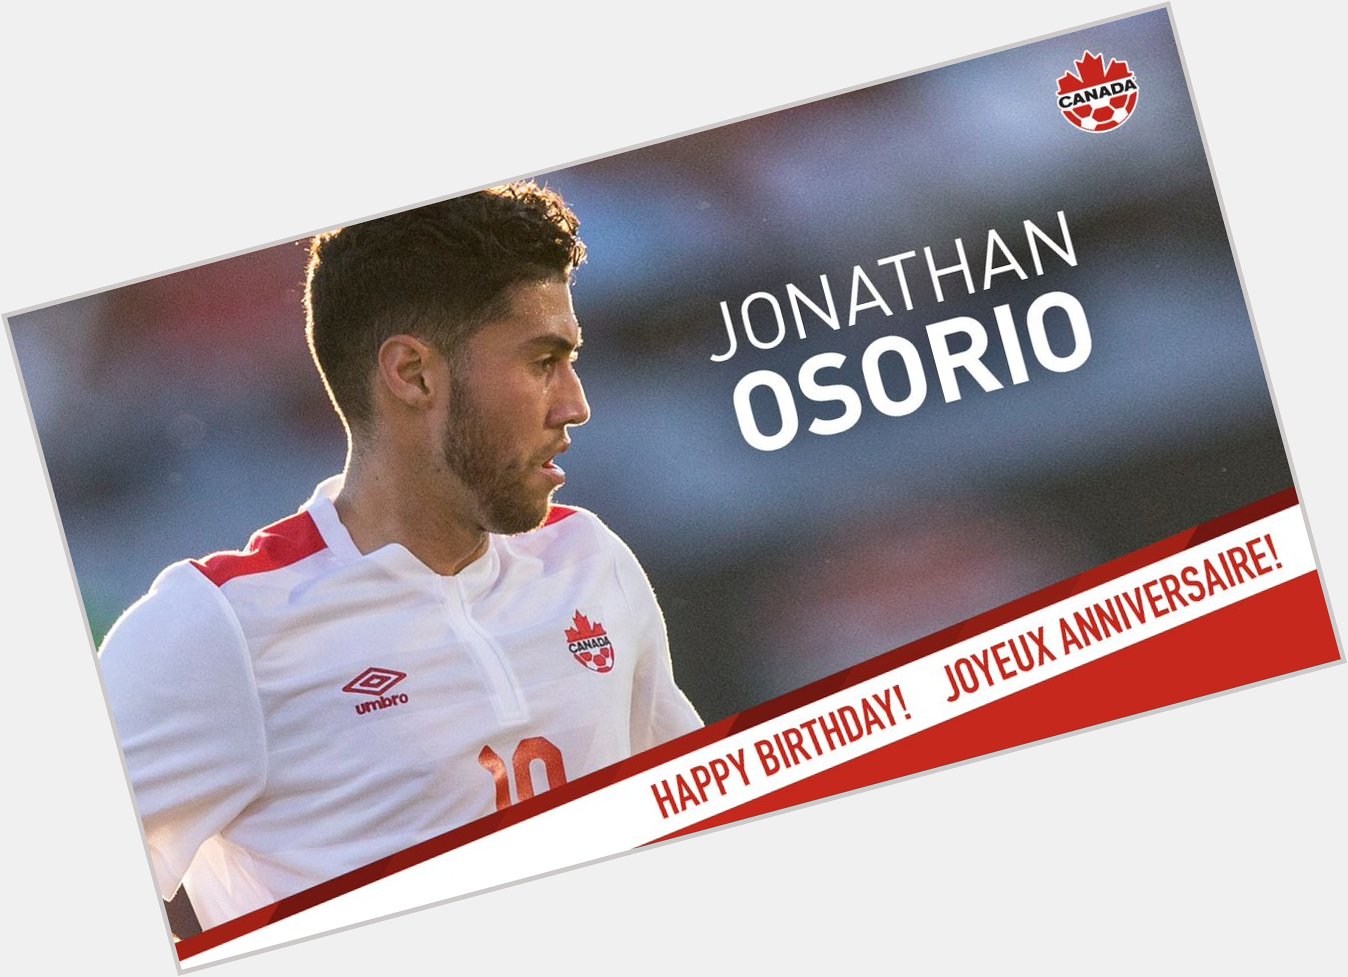 Happy birthday to Jonathan Osorio, presently with getting ready for the match at Stade Saputo tomorrow! 